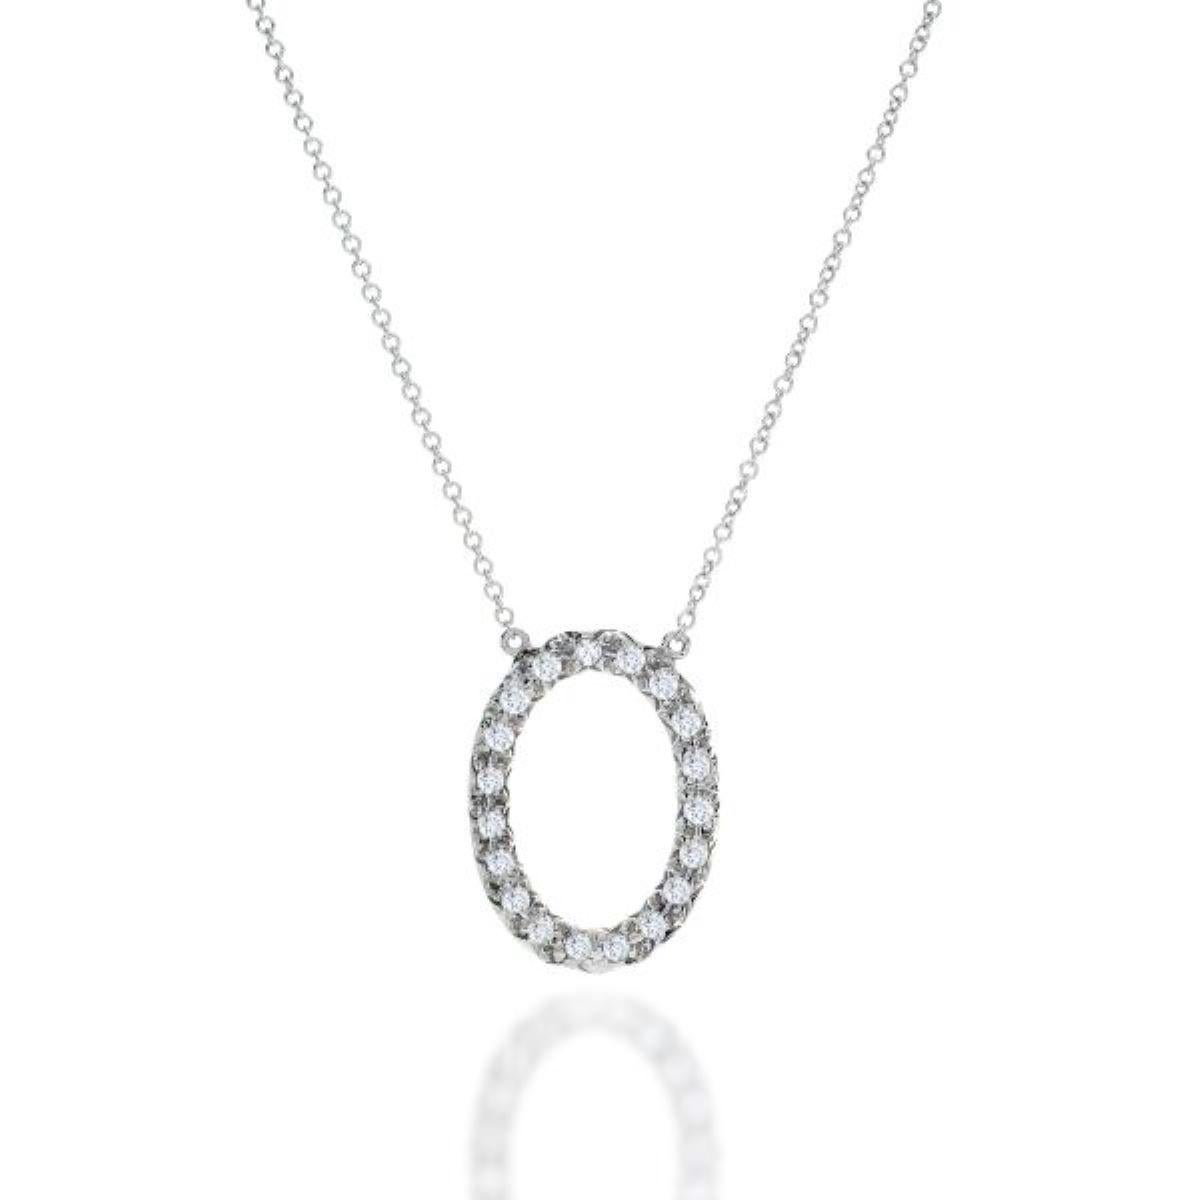 Metal: 18KT White Gold
Chain Length: 18